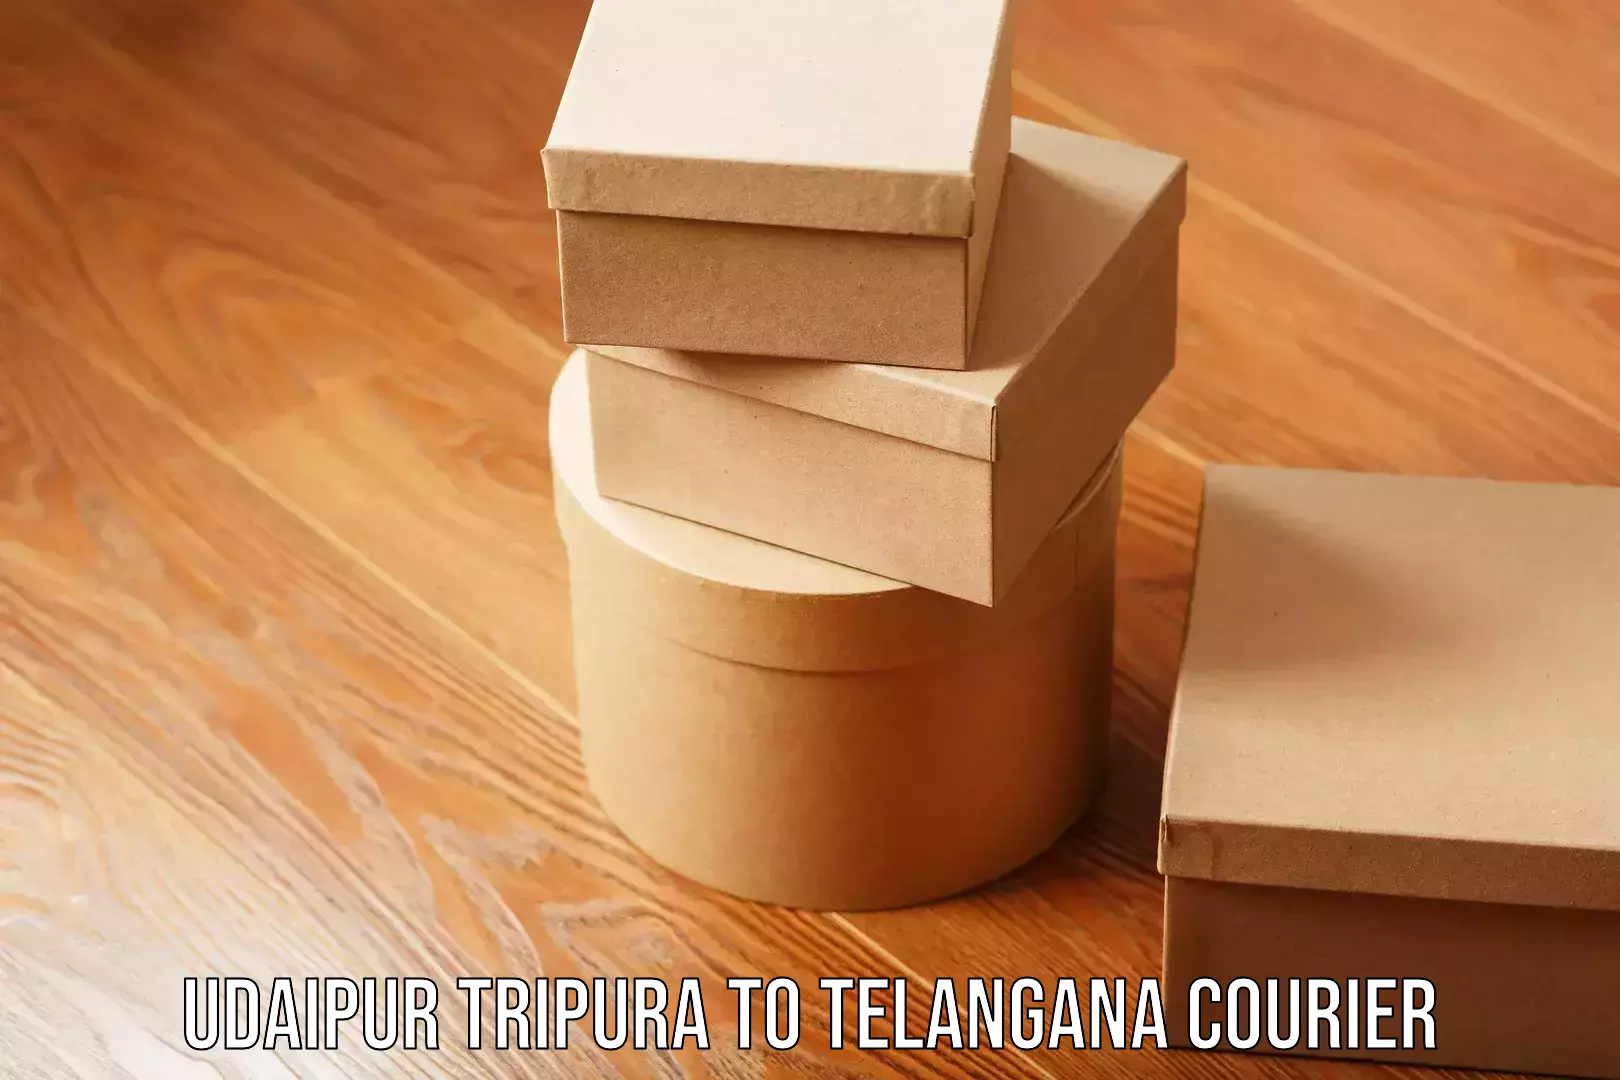 On-call courier service Udaipur Tripura to Telangana